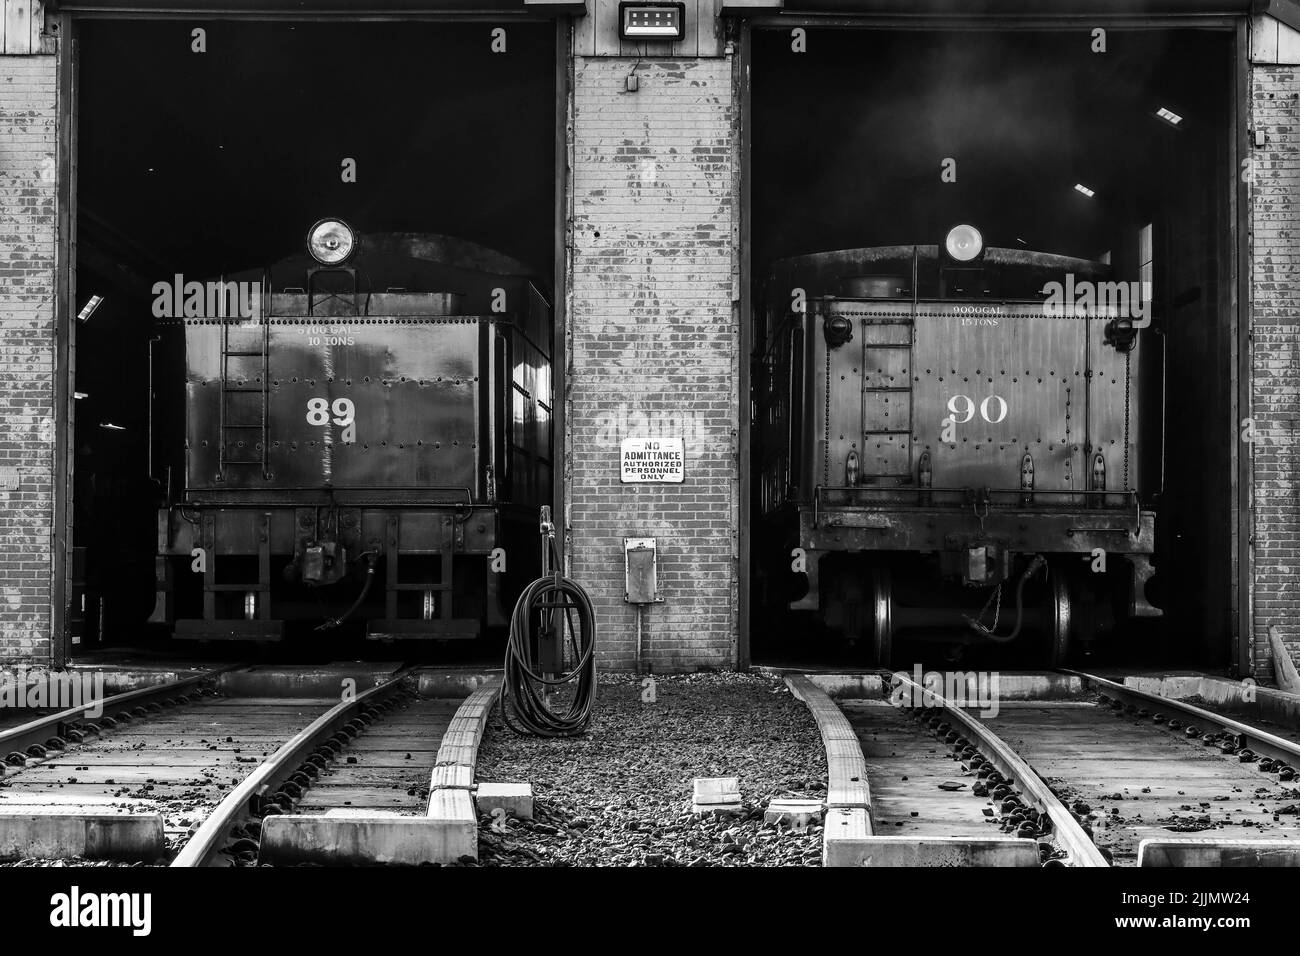 A grayscale view of train engines 89 and 90 in the shed at Strasburg Railroad, United States Stock Photo